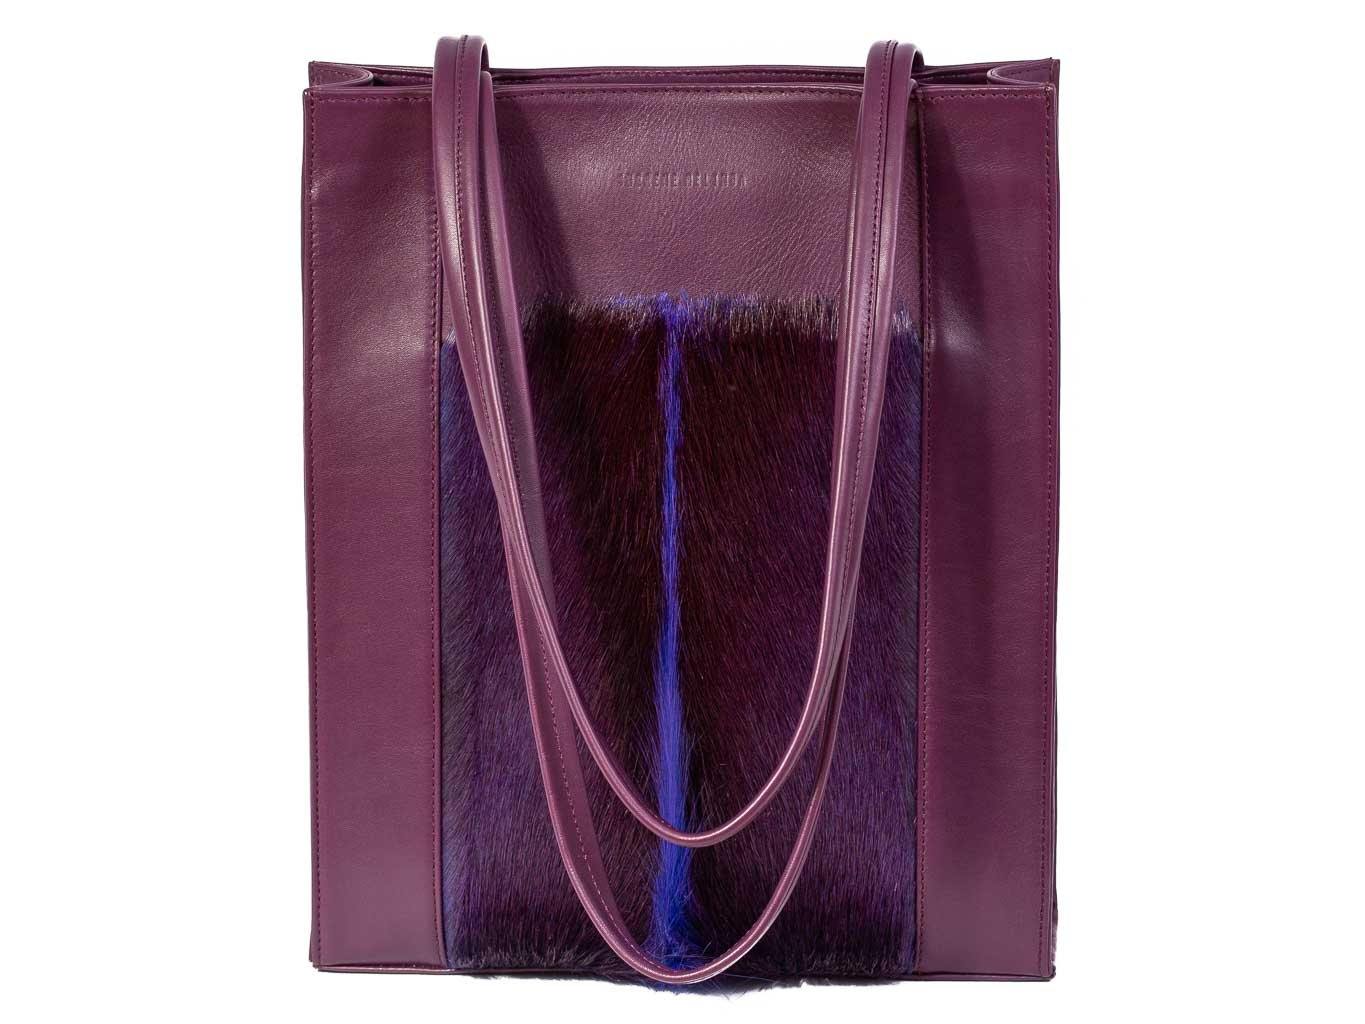 Tote Springbok Handbag in Deep Purple with a fan feature by Sherene Melinda front handle